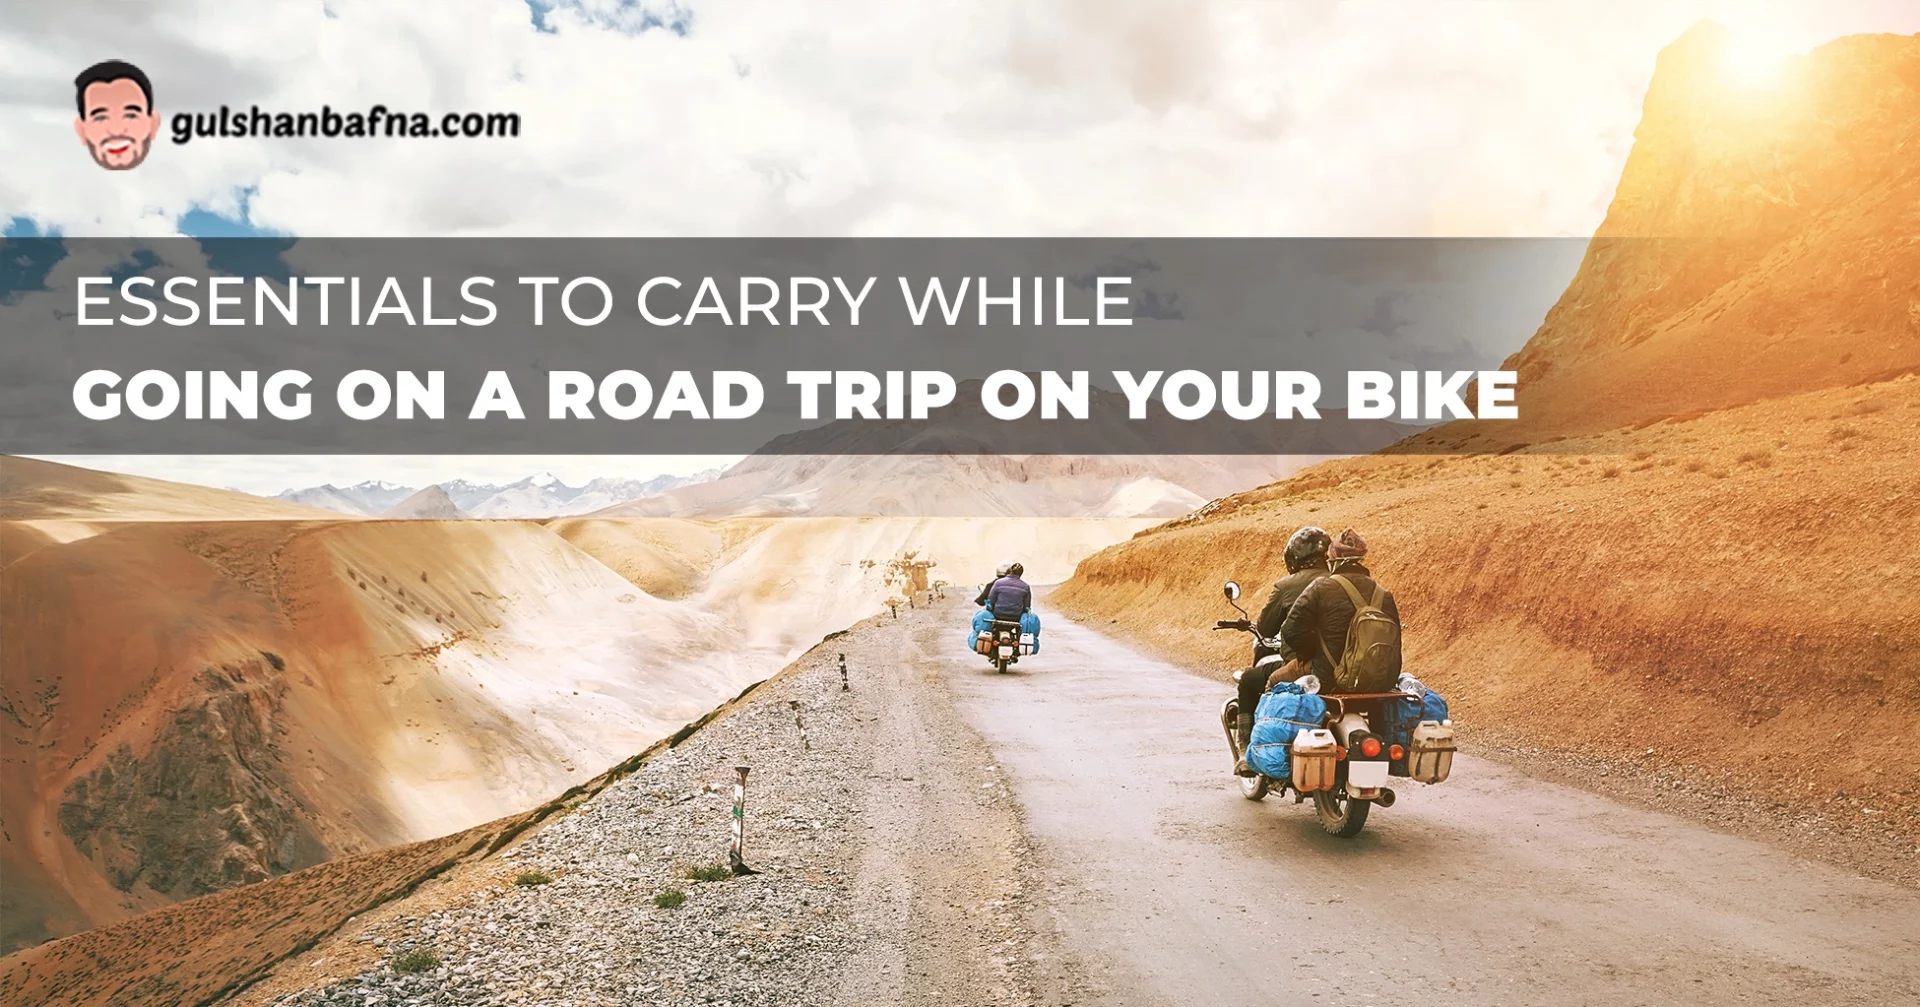 Essentials To Carry While Going On a Road Trip On Your Bike